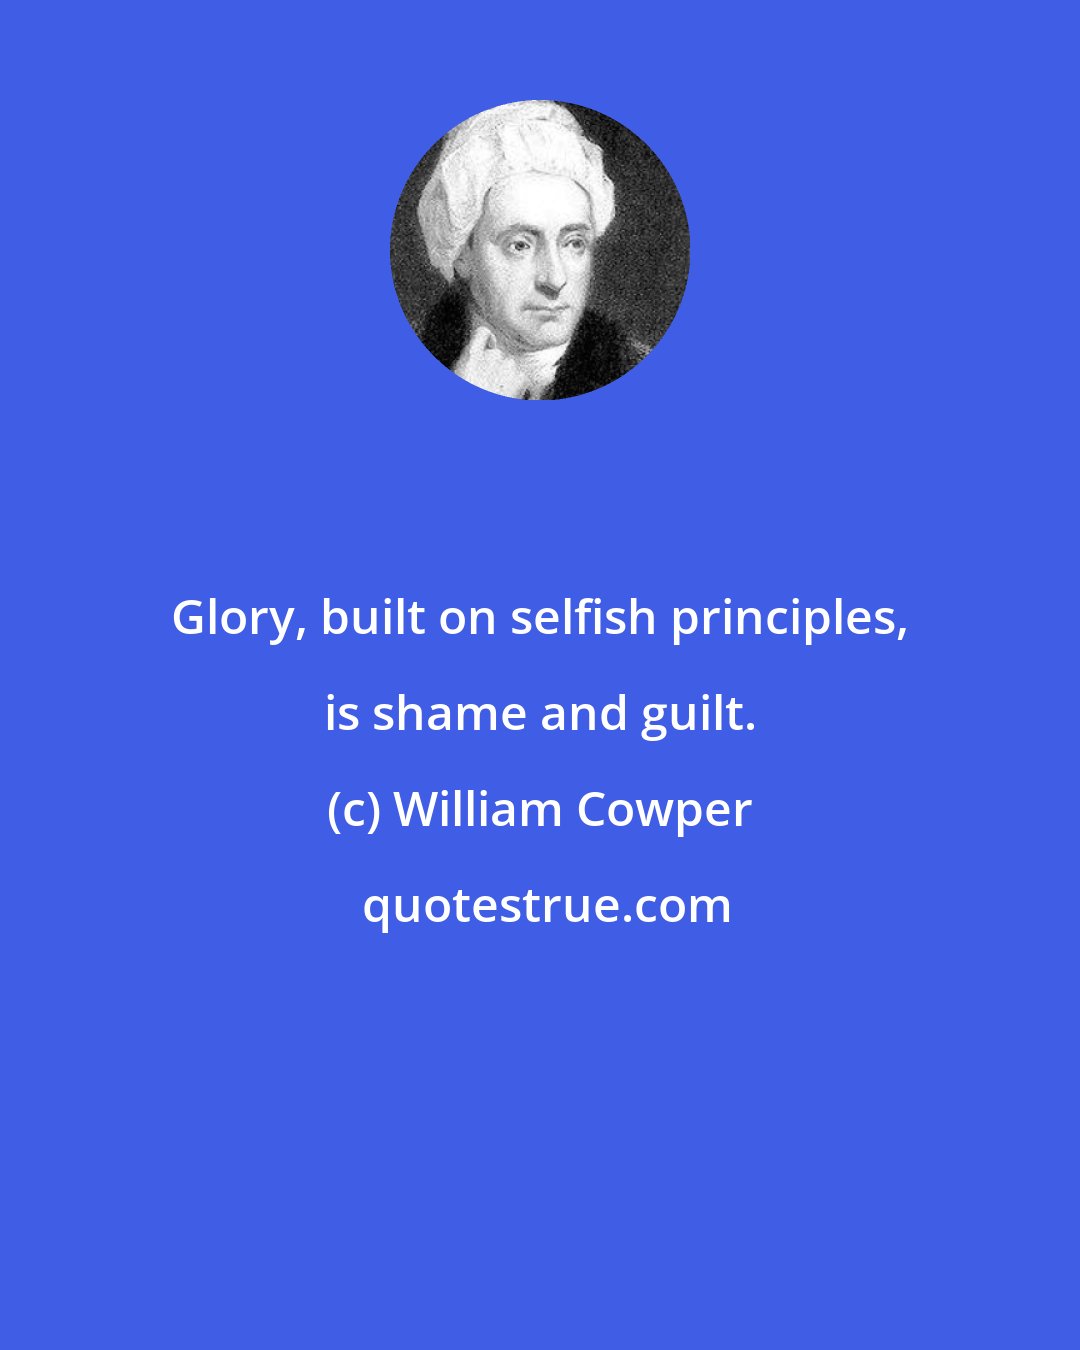 William Cowper: Glory, built on selfish principles, is shame and guilt.